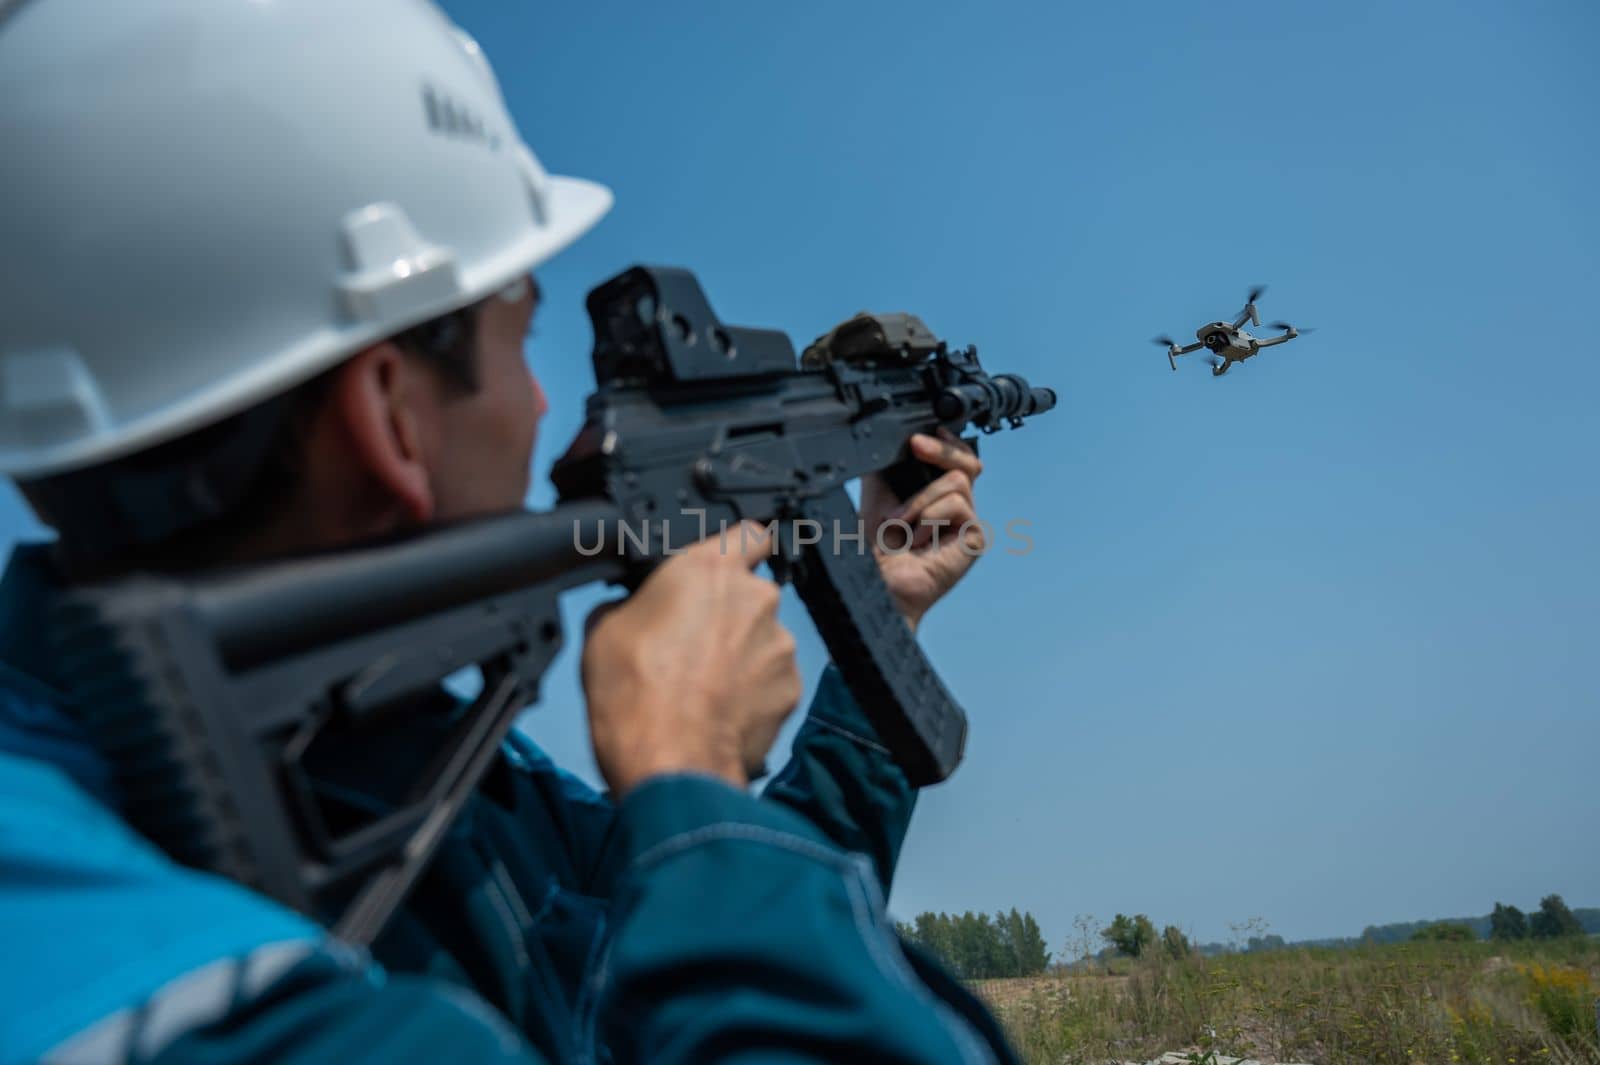 Caucasian man in a helmet shoots a flying drone with a rifle. by mrwed54